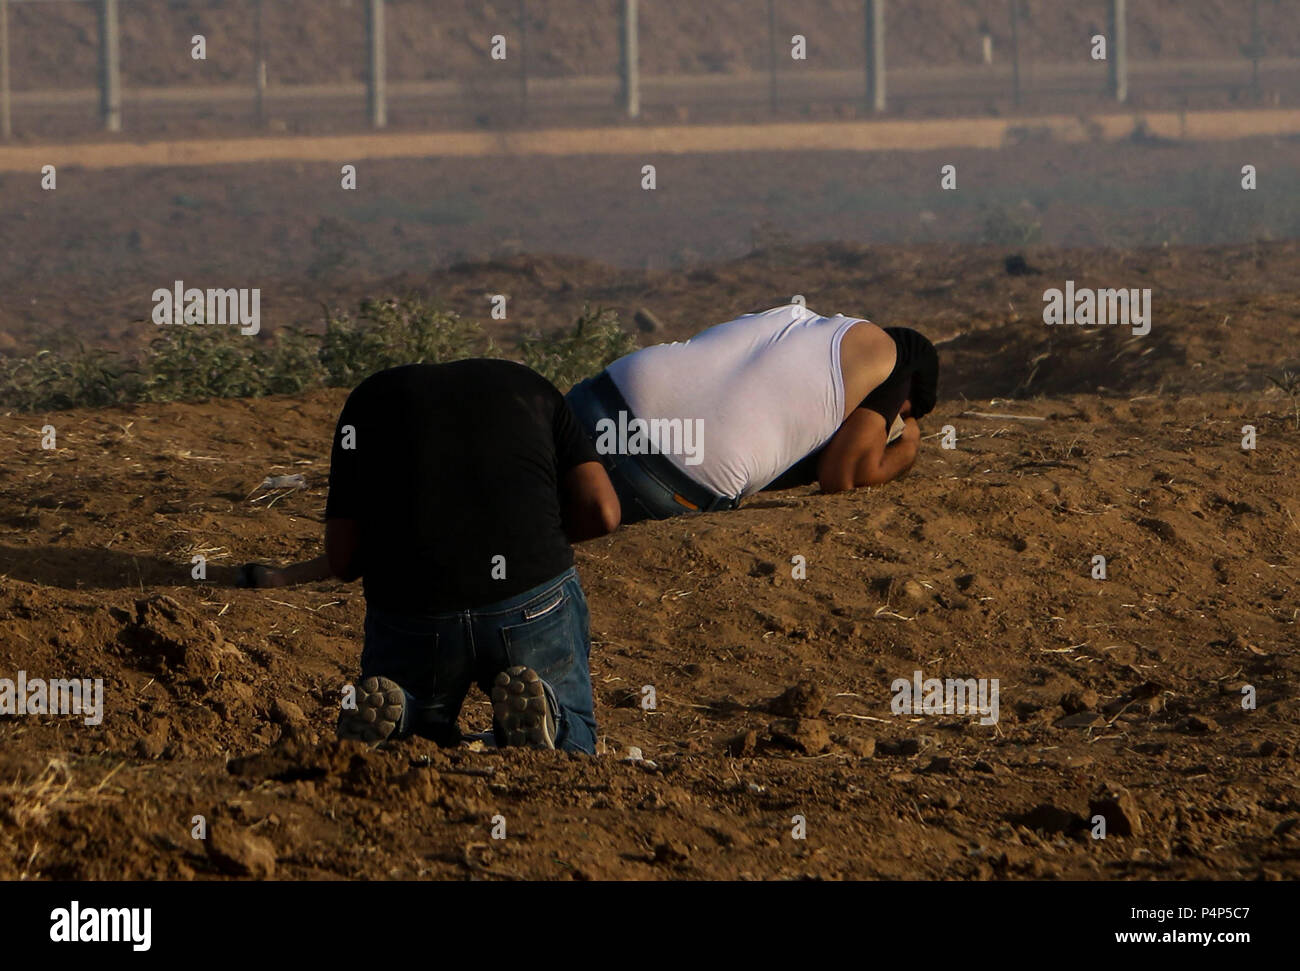 Gaza, Palestinian territory. 22nd June 2018. - A number of Palestinians demonstrators are injured by tear gas and gunshot fire in clashes with Israeli soldiers along the Gaza Israeli border on the east of Gaza City, close to the Nahal Oz Israeli outpost. Credit: ZUMA Press, Inc./Alamy Live News Stock Photo